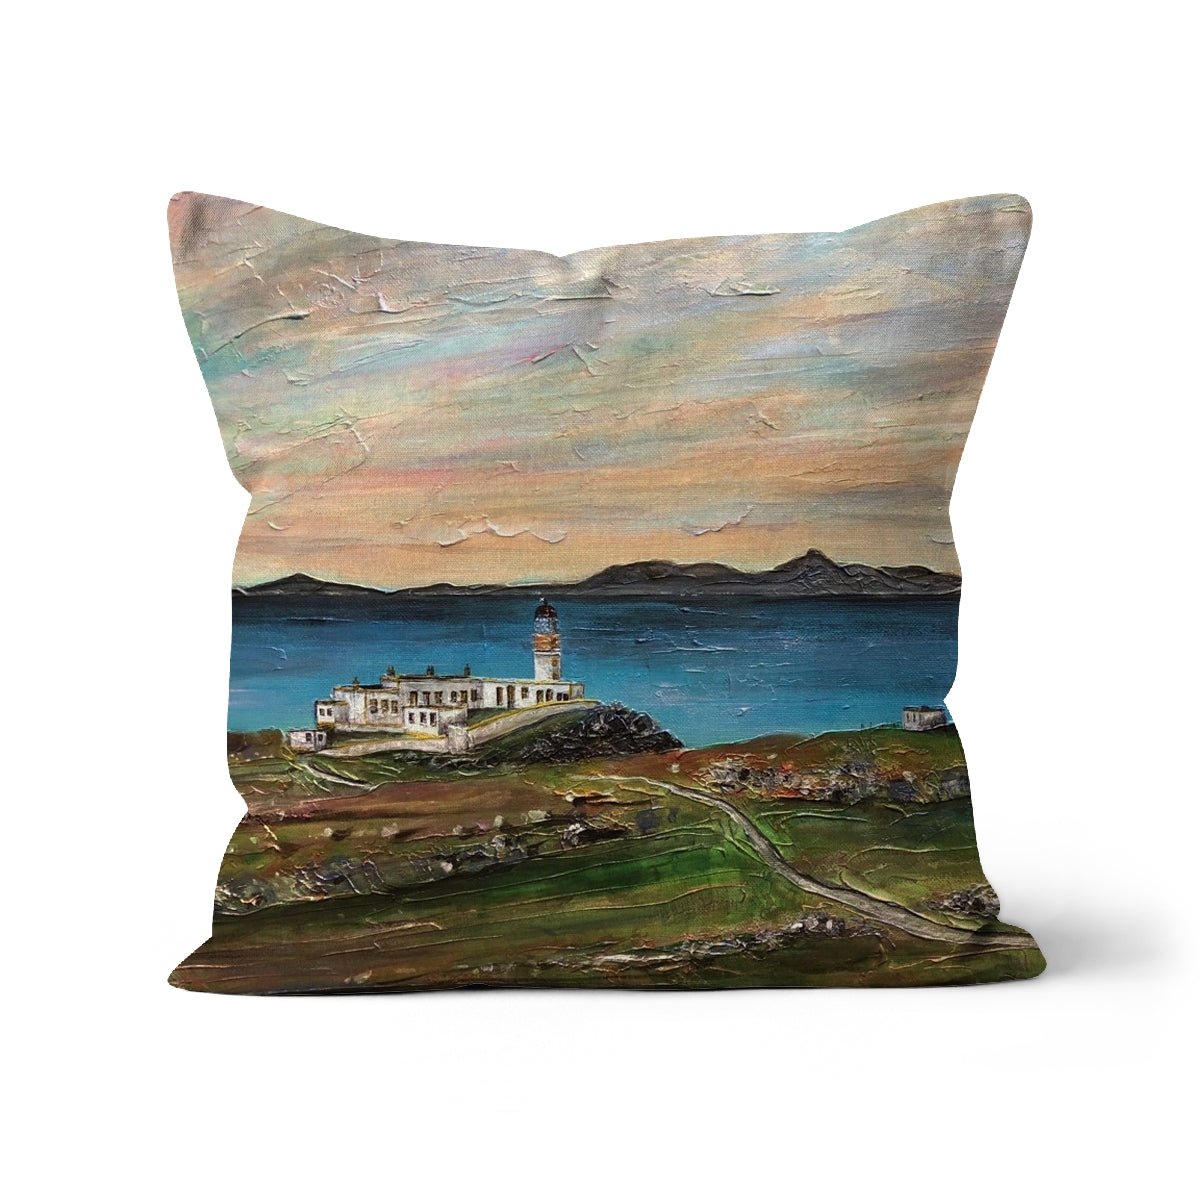 Neist Point Skye Art Gifts Cushion-Cushions-Skye Art Gallery-Faux Suede-22"x22"-Paintings, Prints, Homeware, Art Gifts From Scotland By Scottish Artist Kevin Hunter